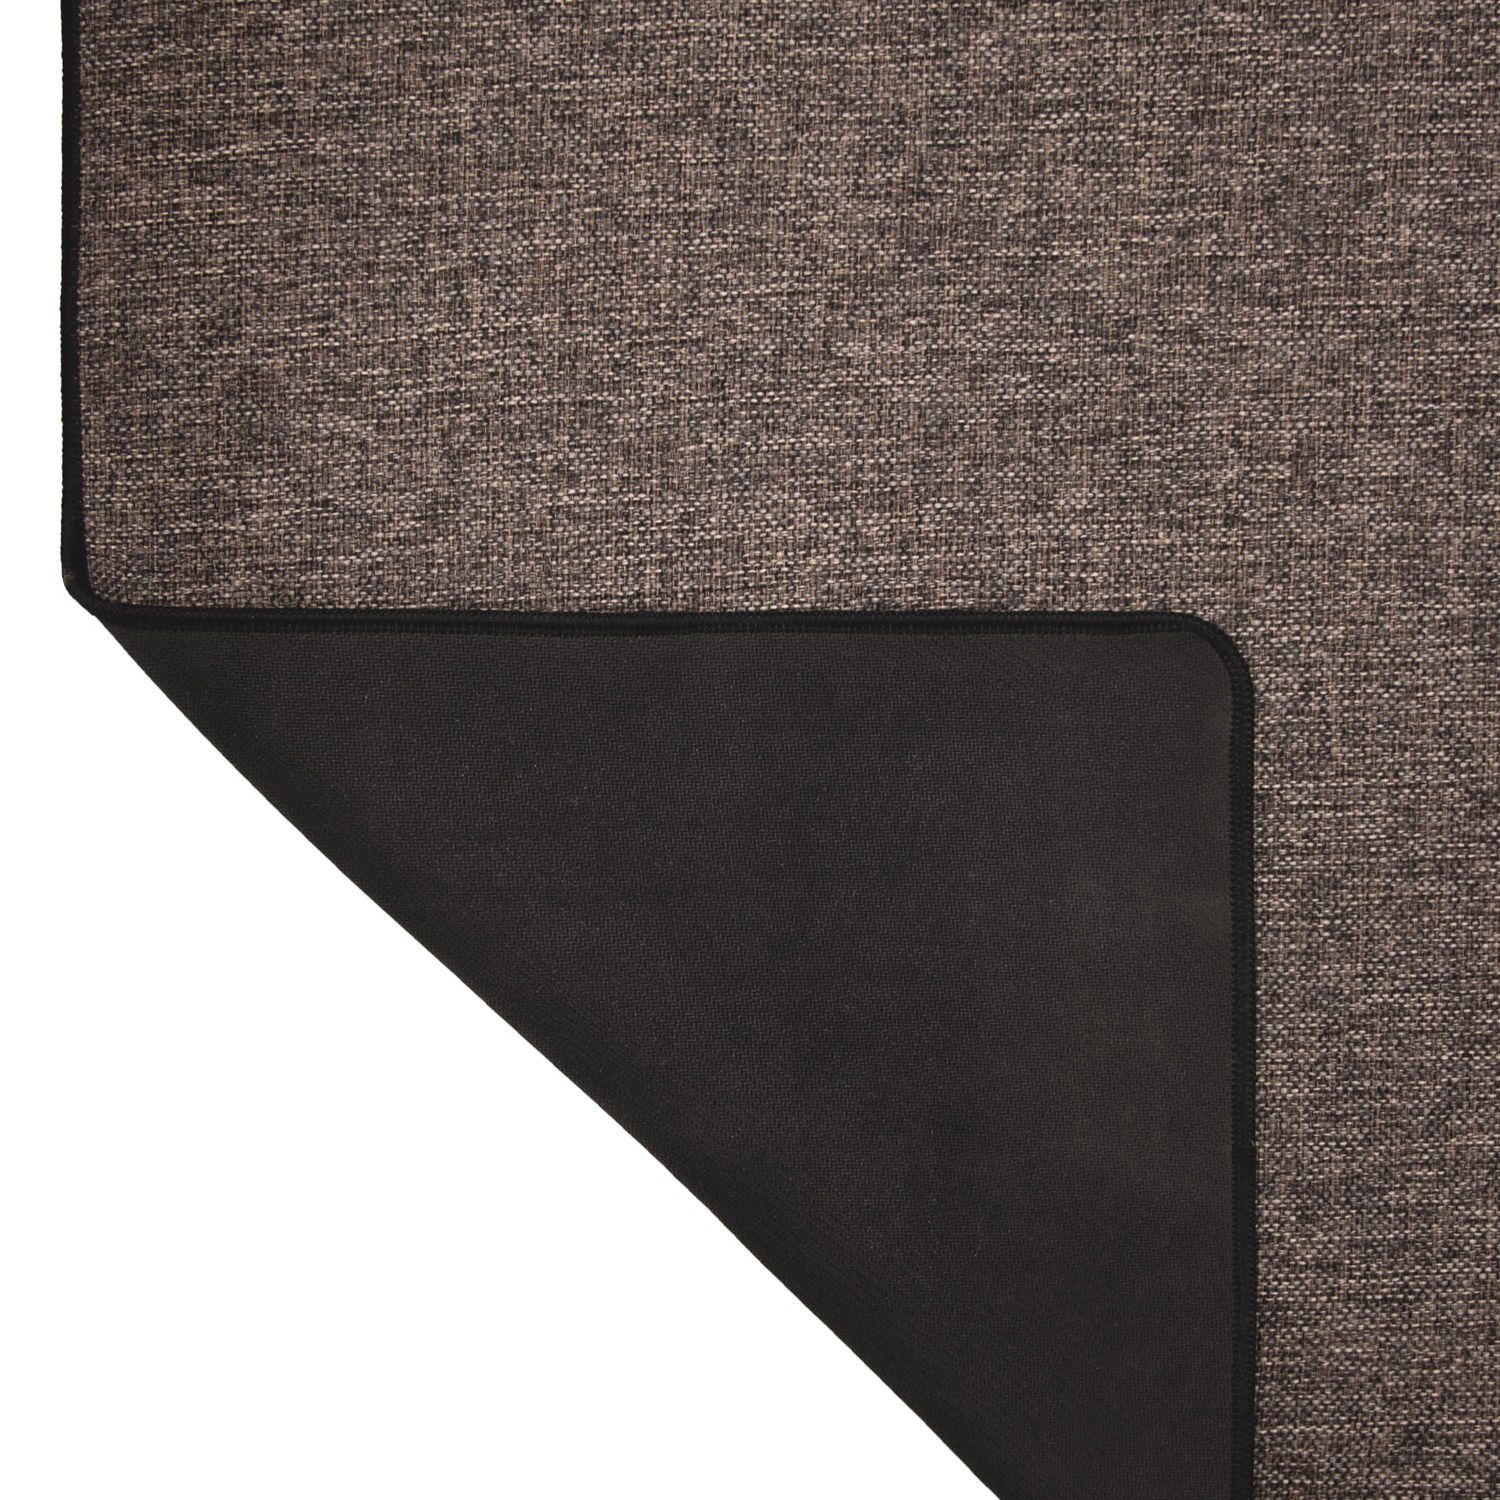 4 ft x 6 ft Wicklow Charcoal Mat, Mainstays 4 ft x 6 ft Wicklow